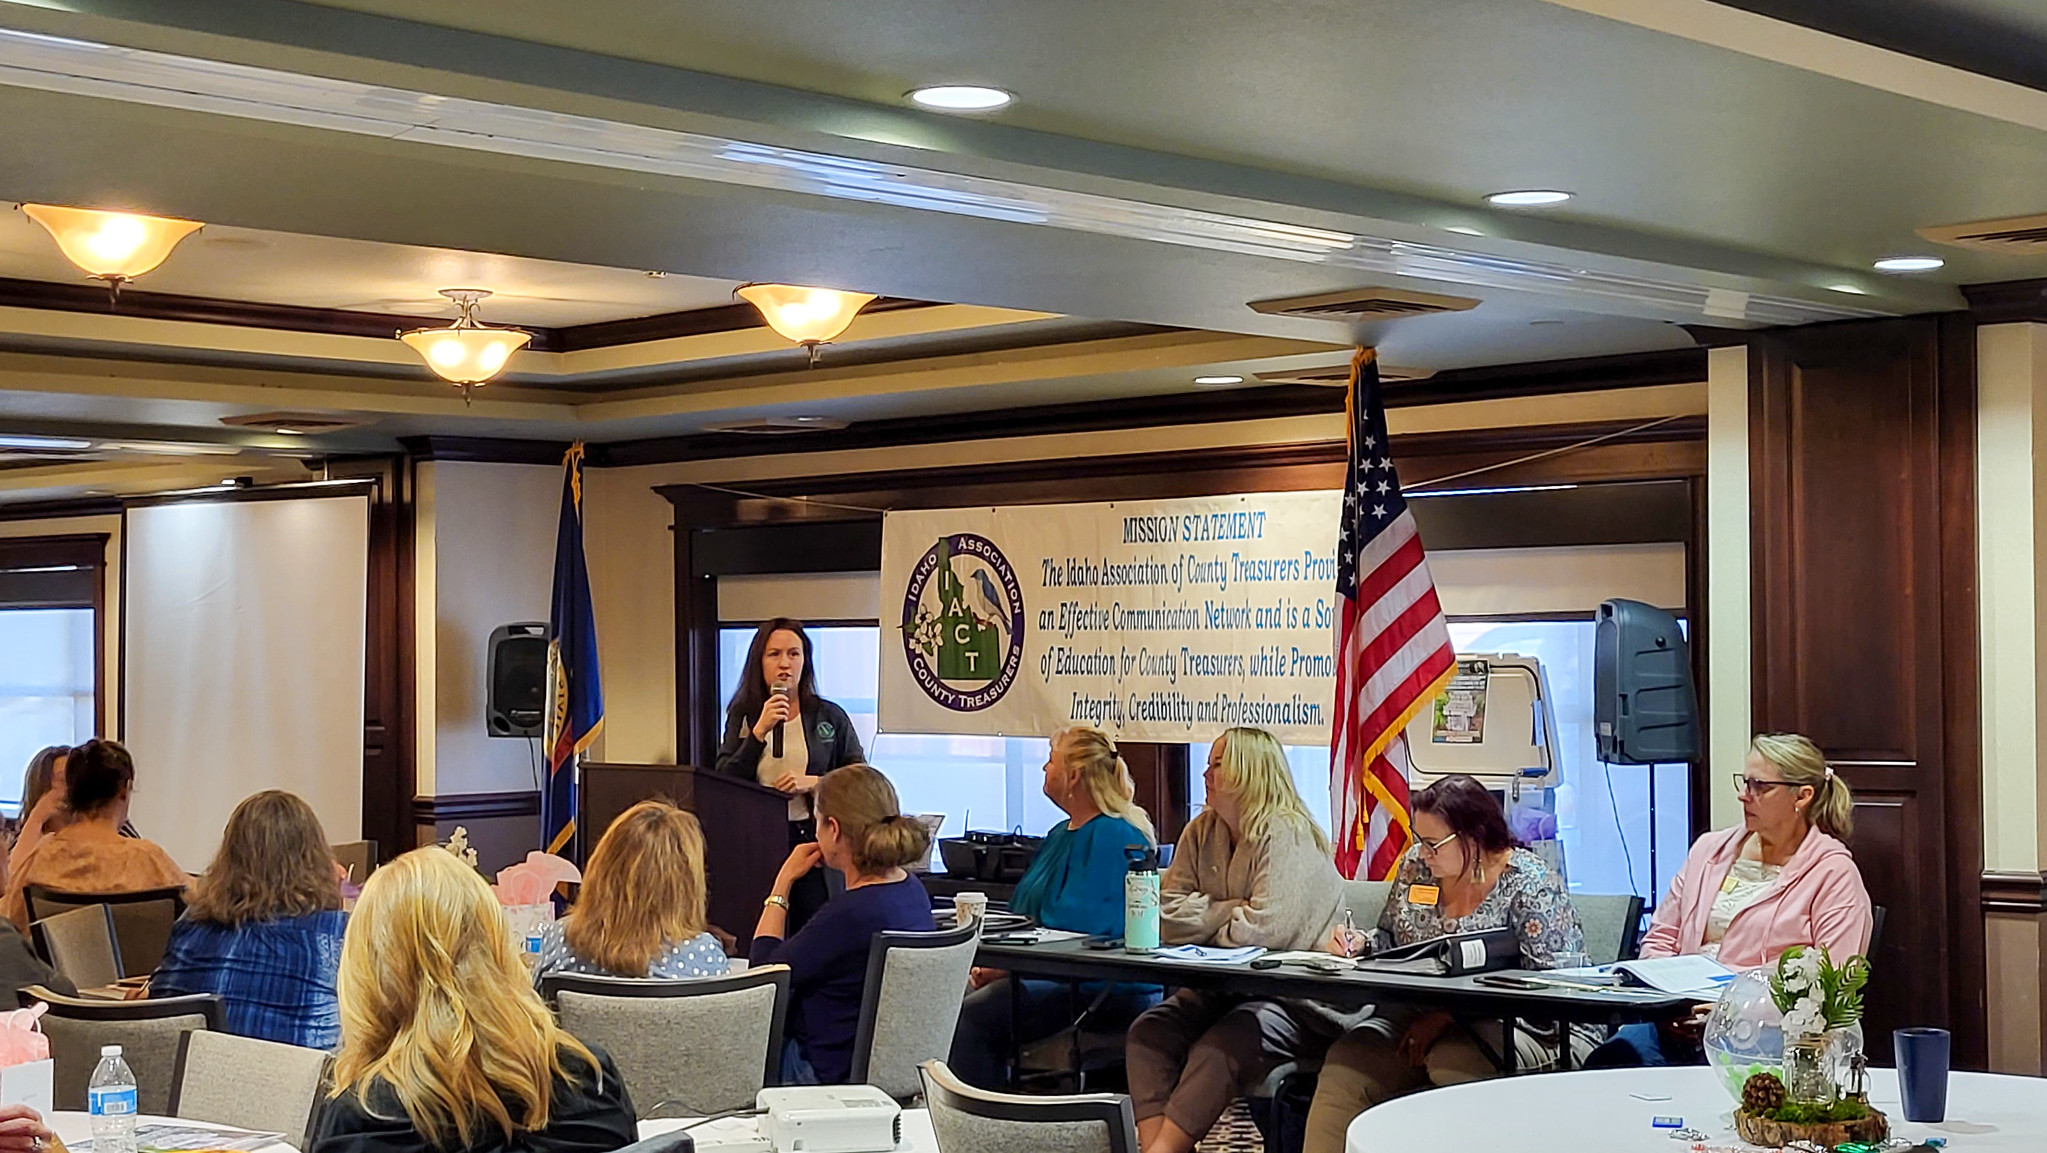 Idaho Association of County Treasurers Holds 98th Annual Conference in McCall